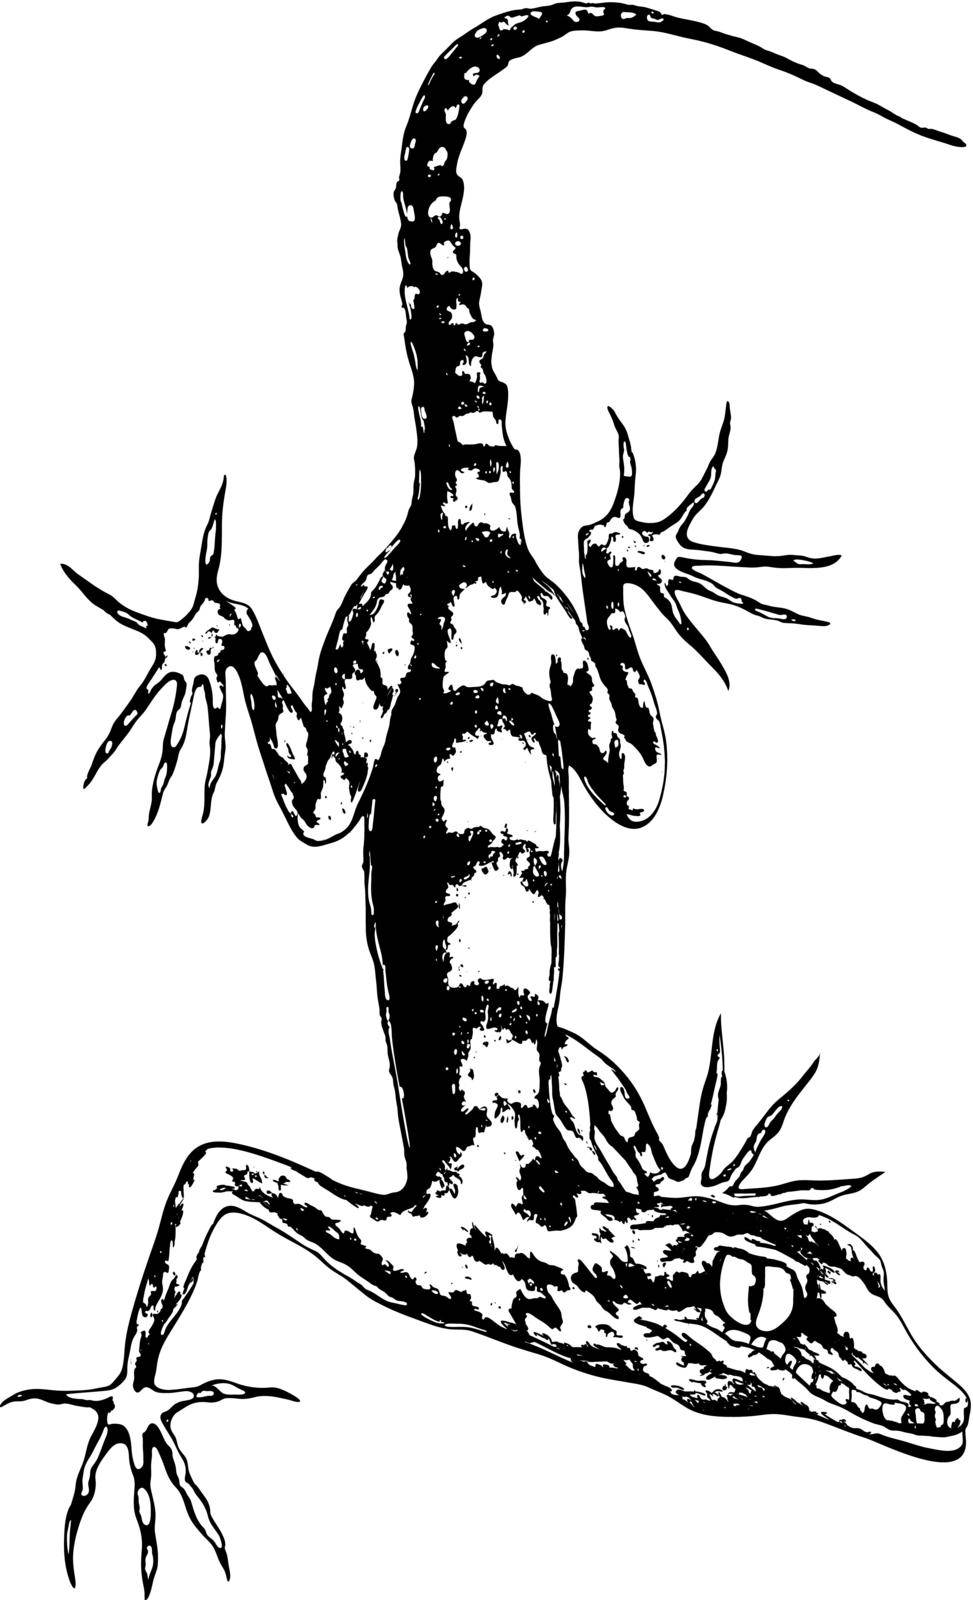 Lizard hand-drawn vector illustration in sketch style.Realistic drawing in graphite pencil on a white background.